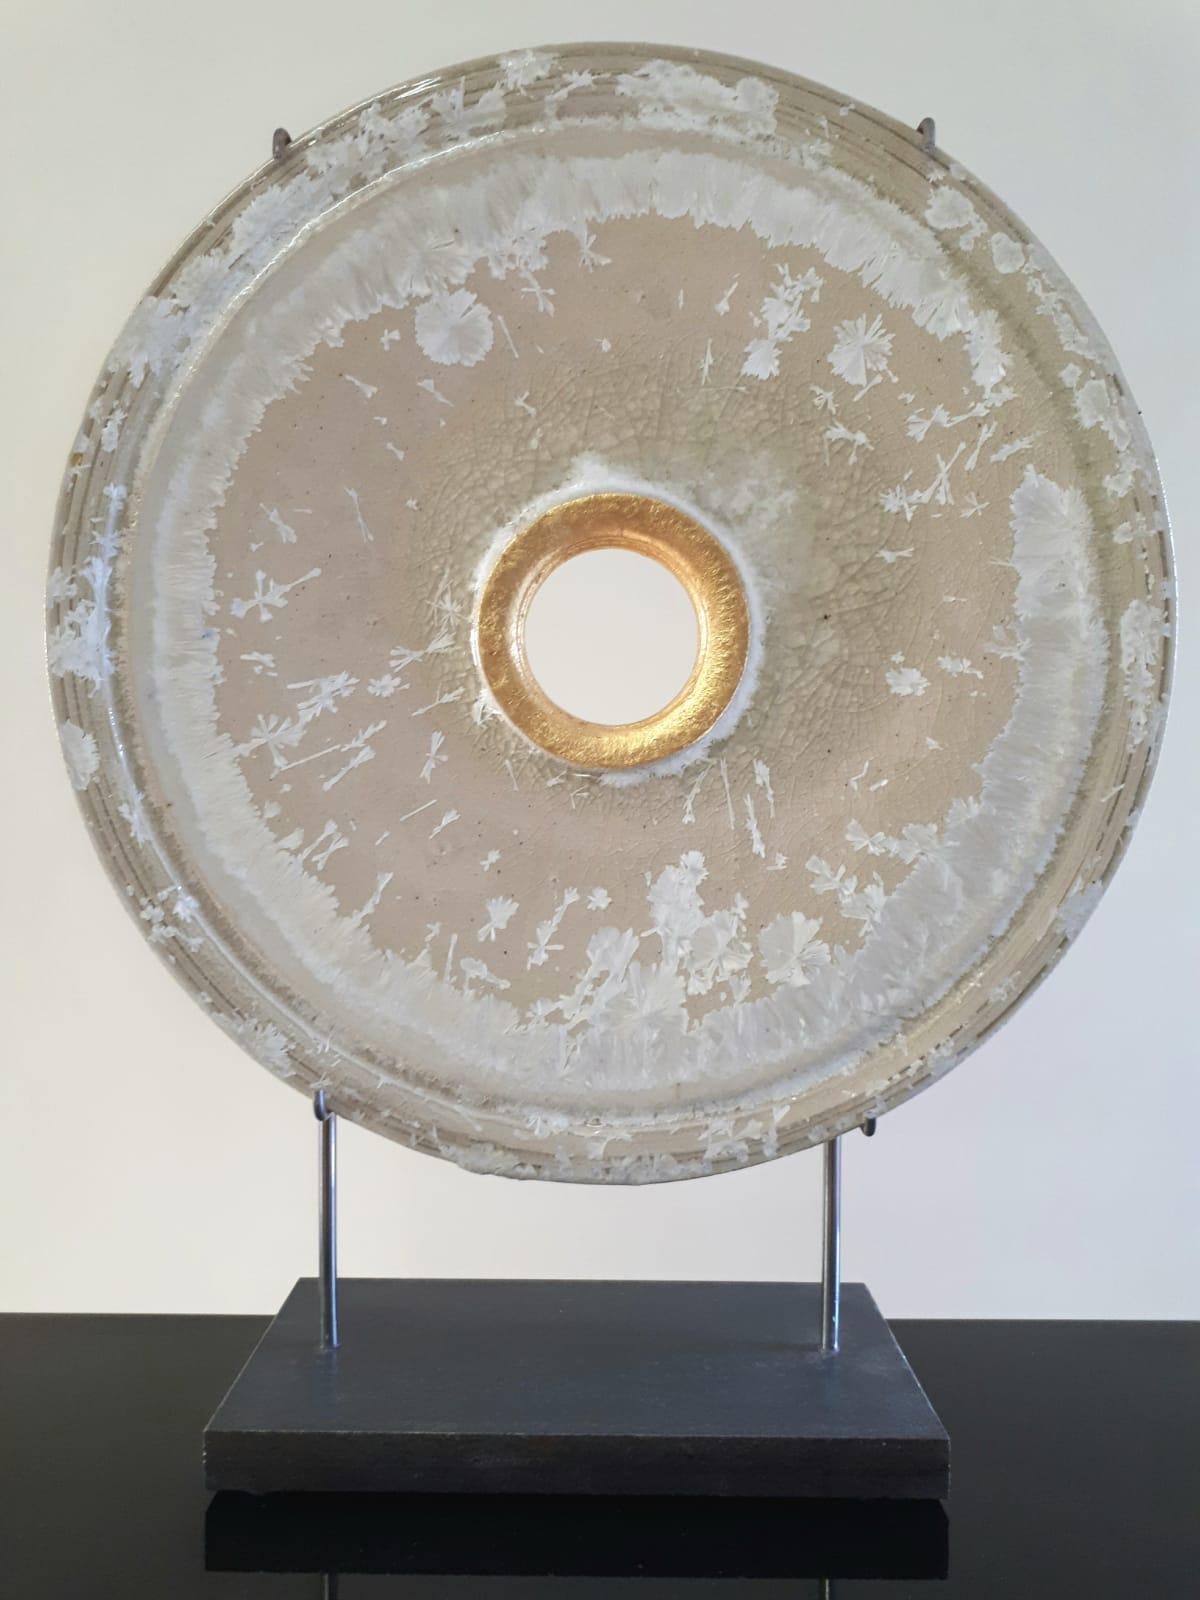 This beautiful, contemporary circular sculpture made from ceramics with crystal glaze and 24k gold leaf stands on an elegant white granite base.
It is a timeless piece full of detail from the burning and glazing process.
Titled on verso.

About the